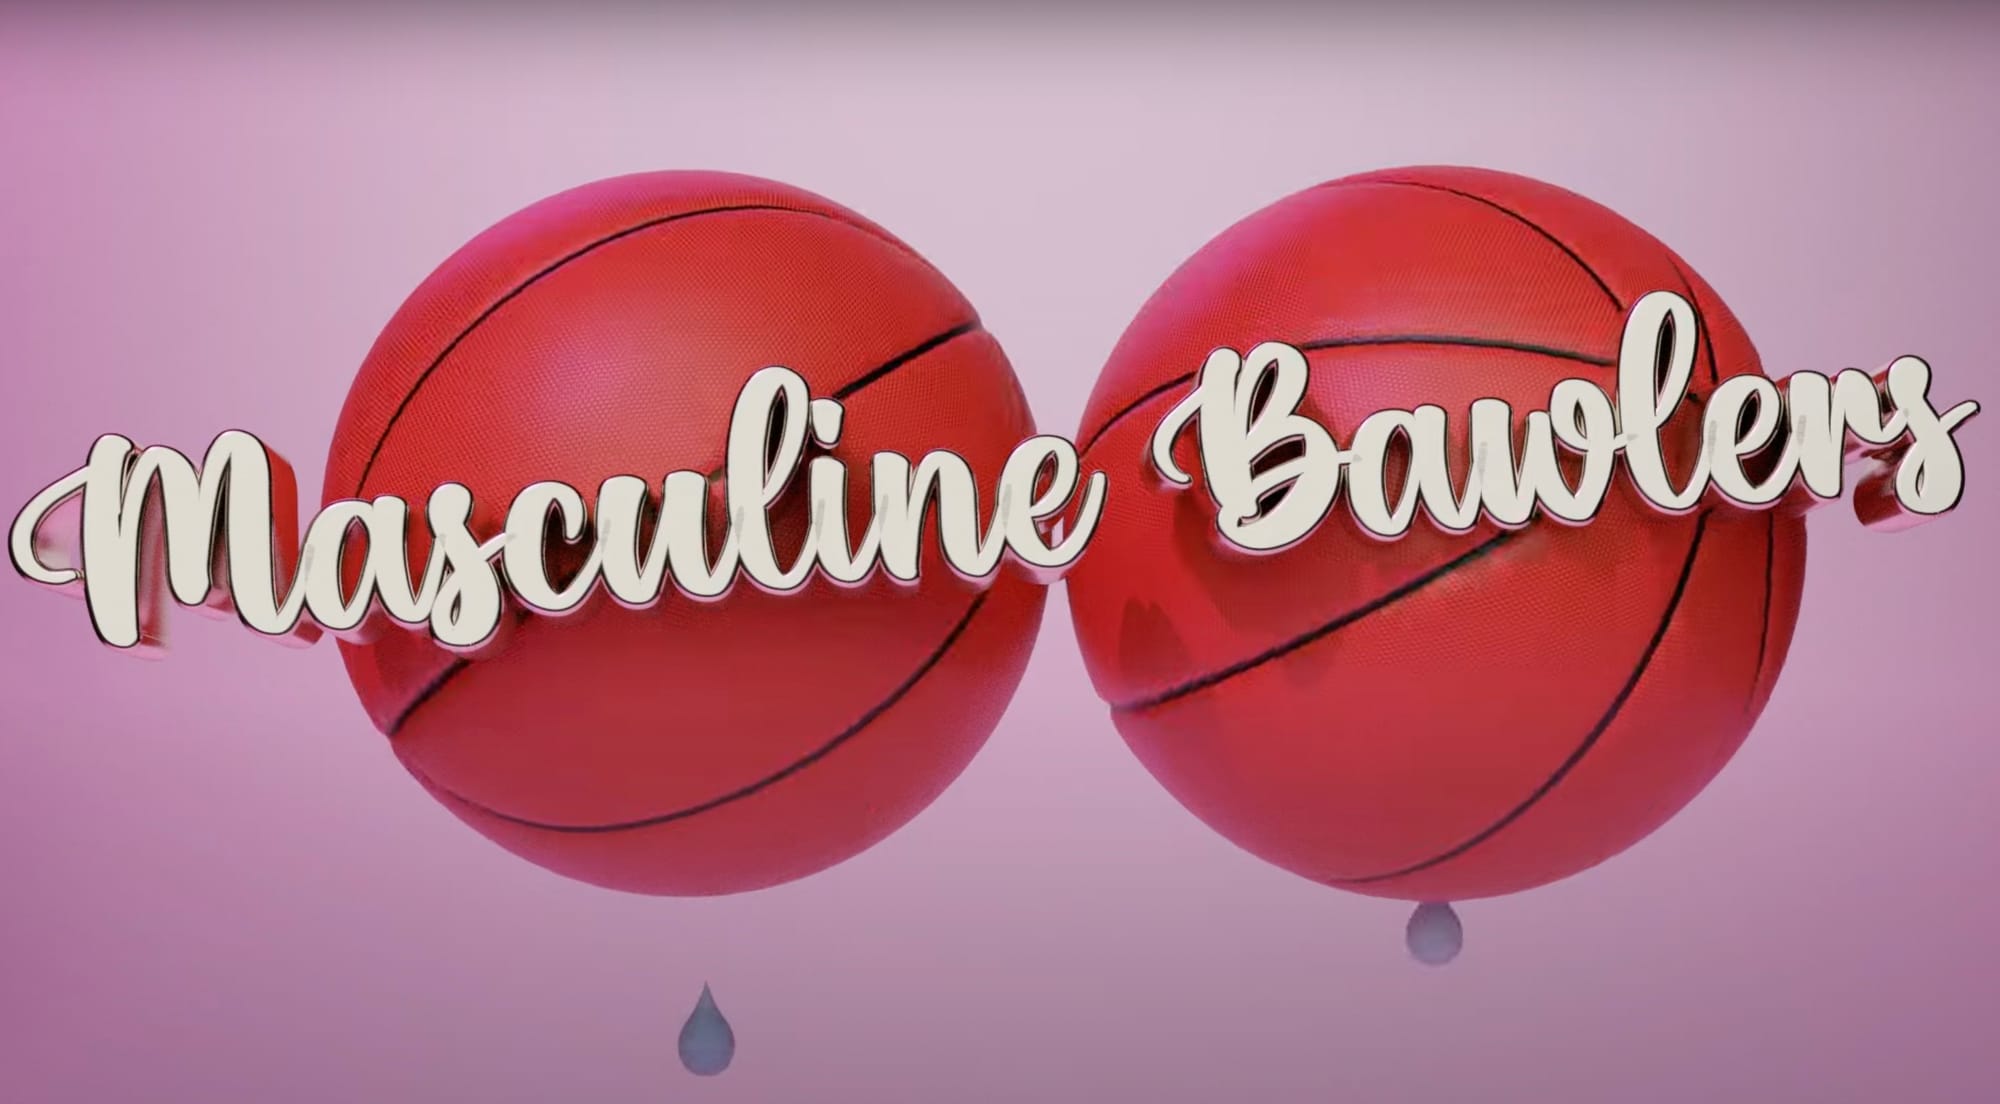 Q: If DailyWire+ Makes a "Lady Ballers" Sequel Would It Be Called "Masculine Bawlers"?